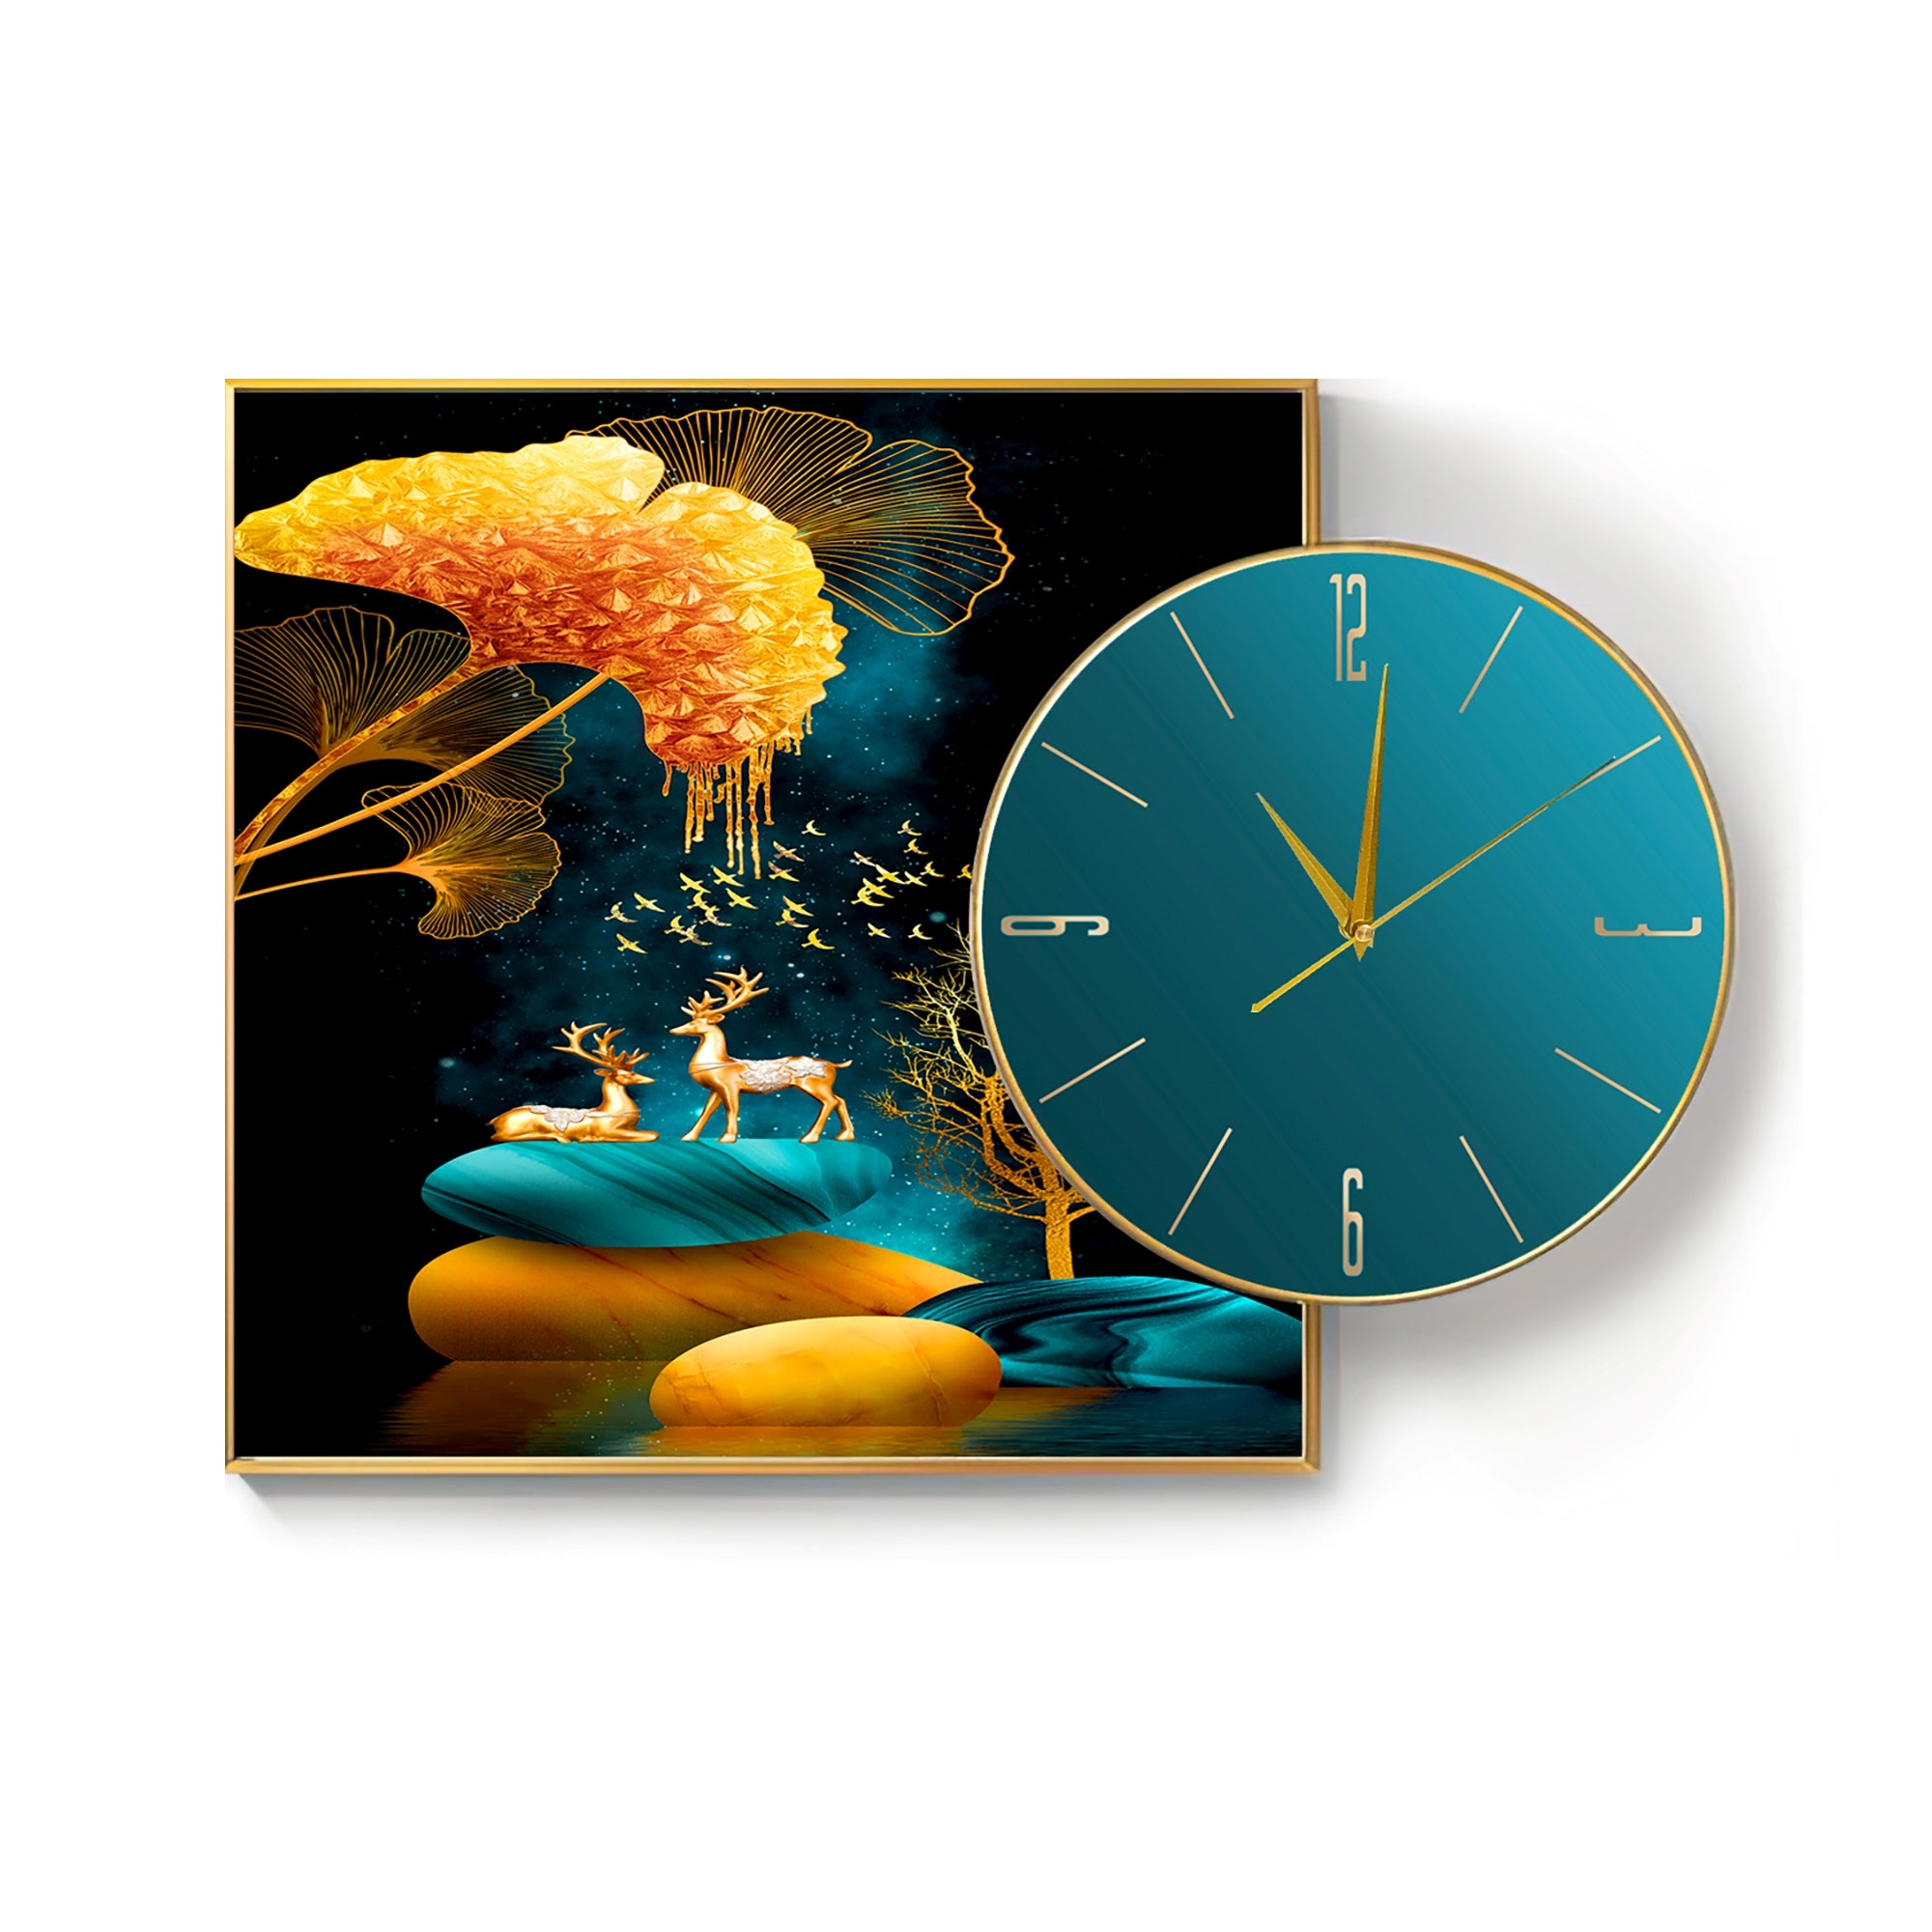 Functional Art: Wall Clock with a Painterly Twist Home Decor crystal porcelain Framed Large wall wall art wall accents wall clock large artistic wall clock